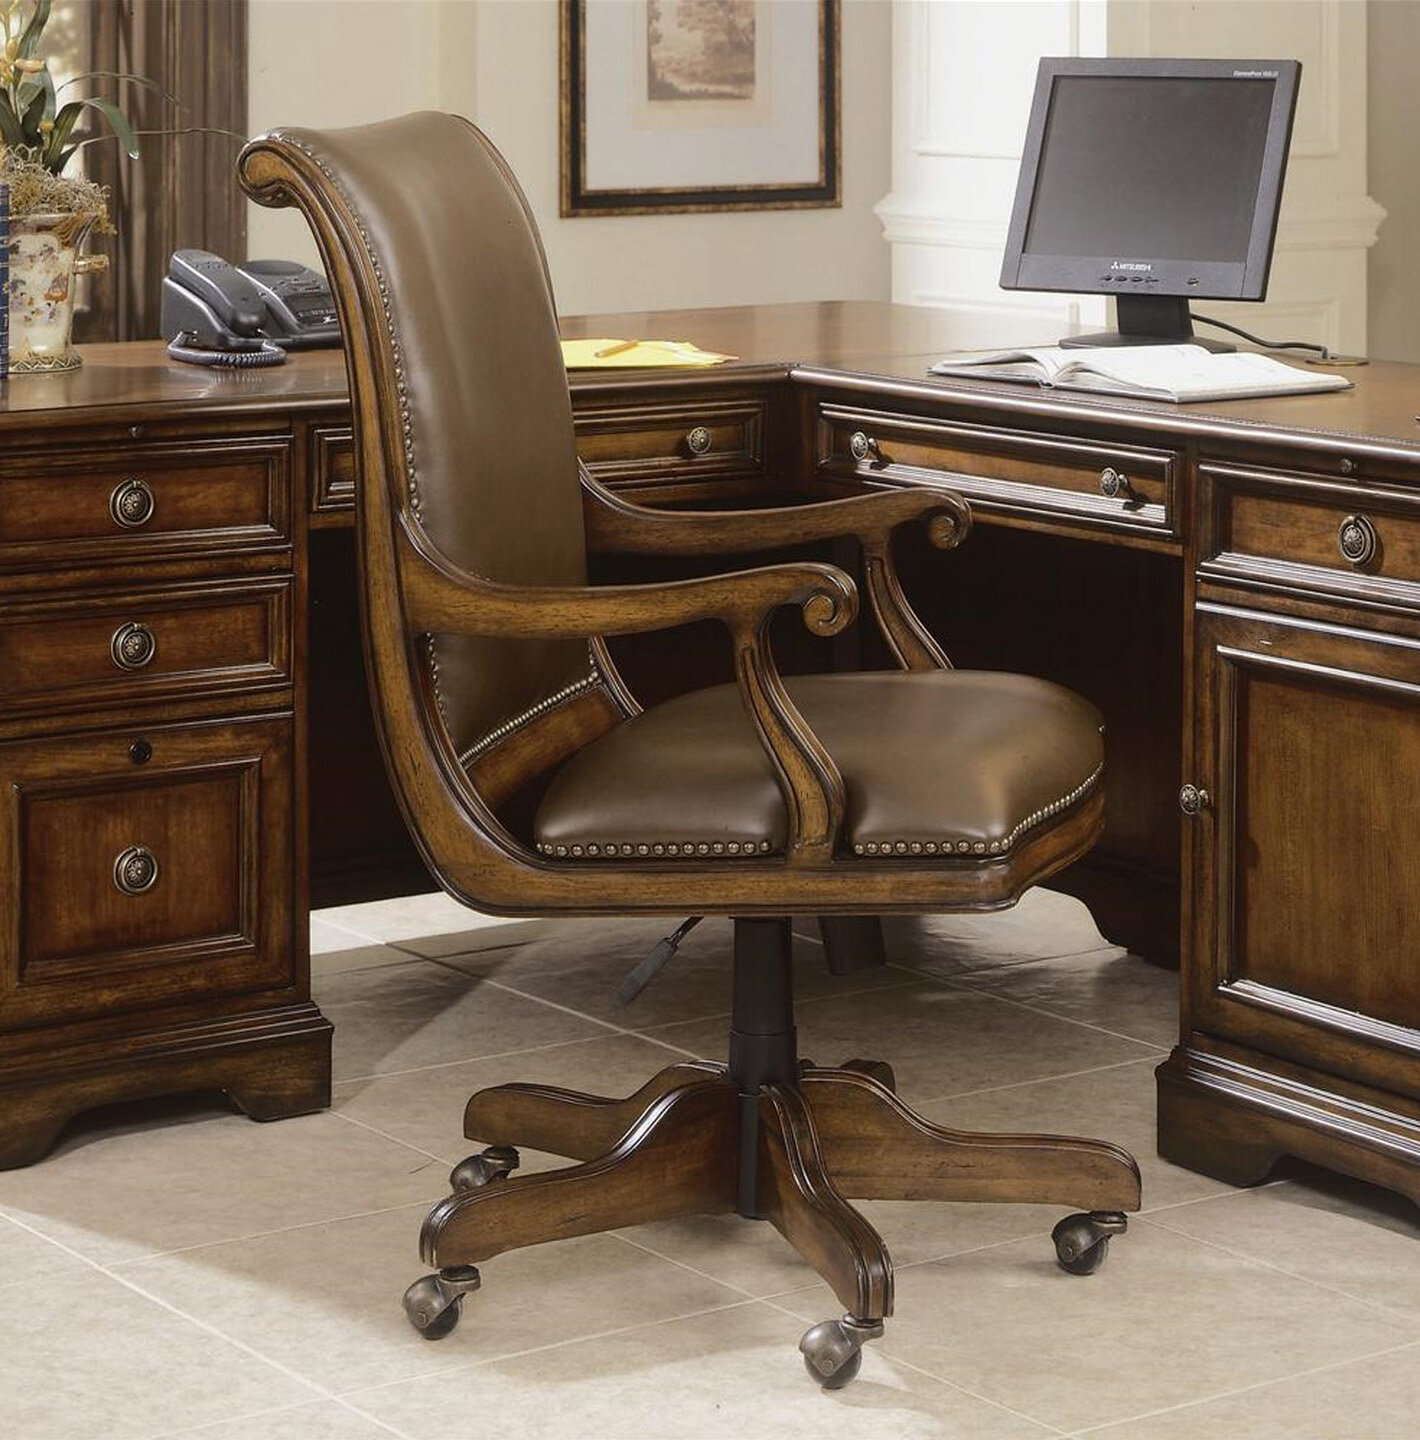 Leather and Nailhead Trim Desk Chair